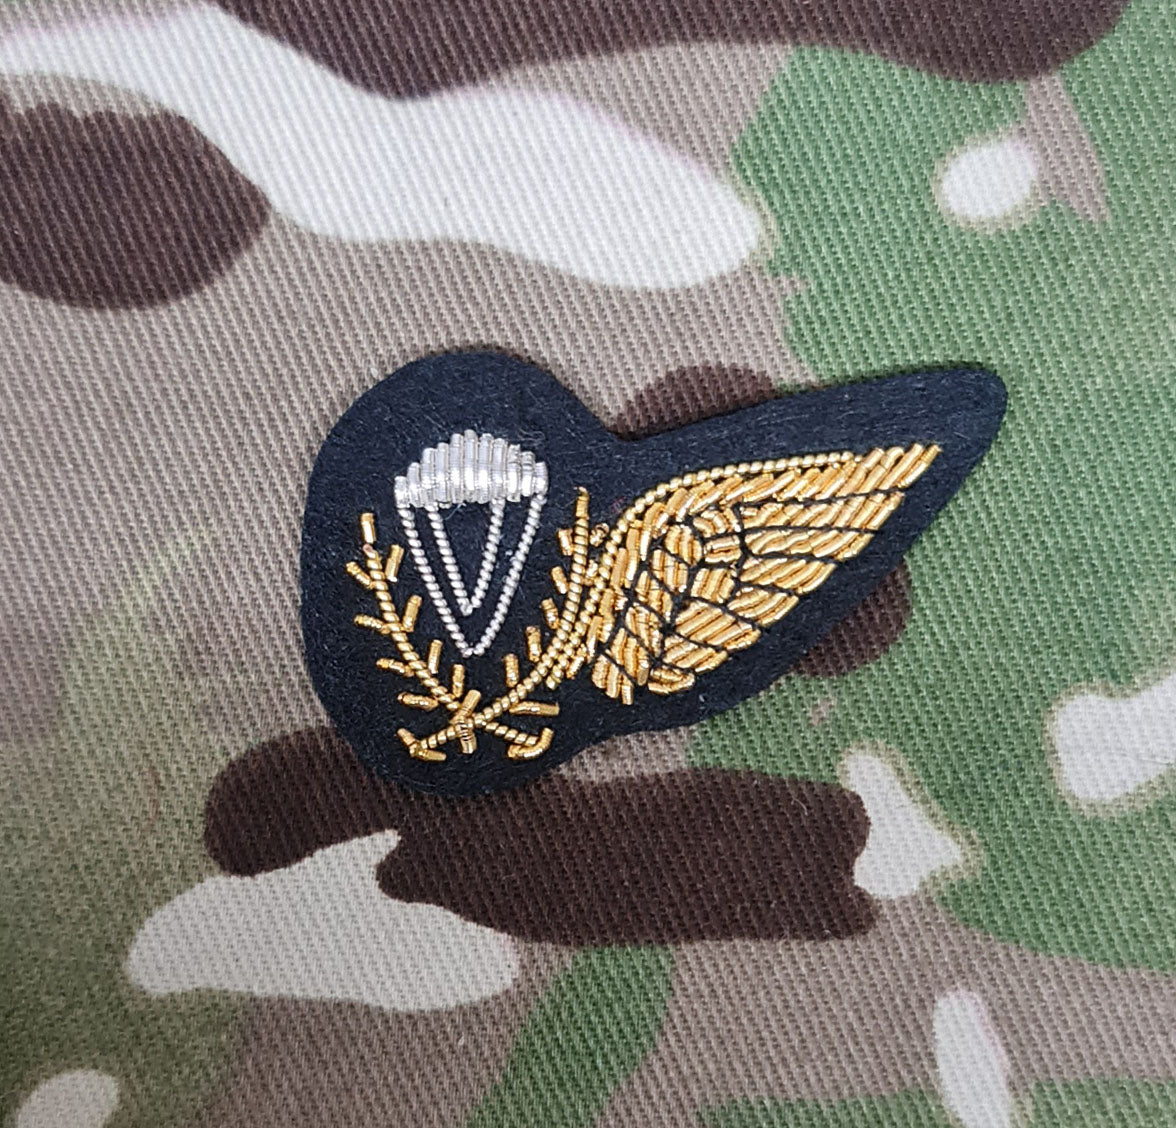 British Army Parachutist Jump Instructor qualification Brevet / Wings bullion Wire Bullion Embroidered Badge gold on black Mess Dress